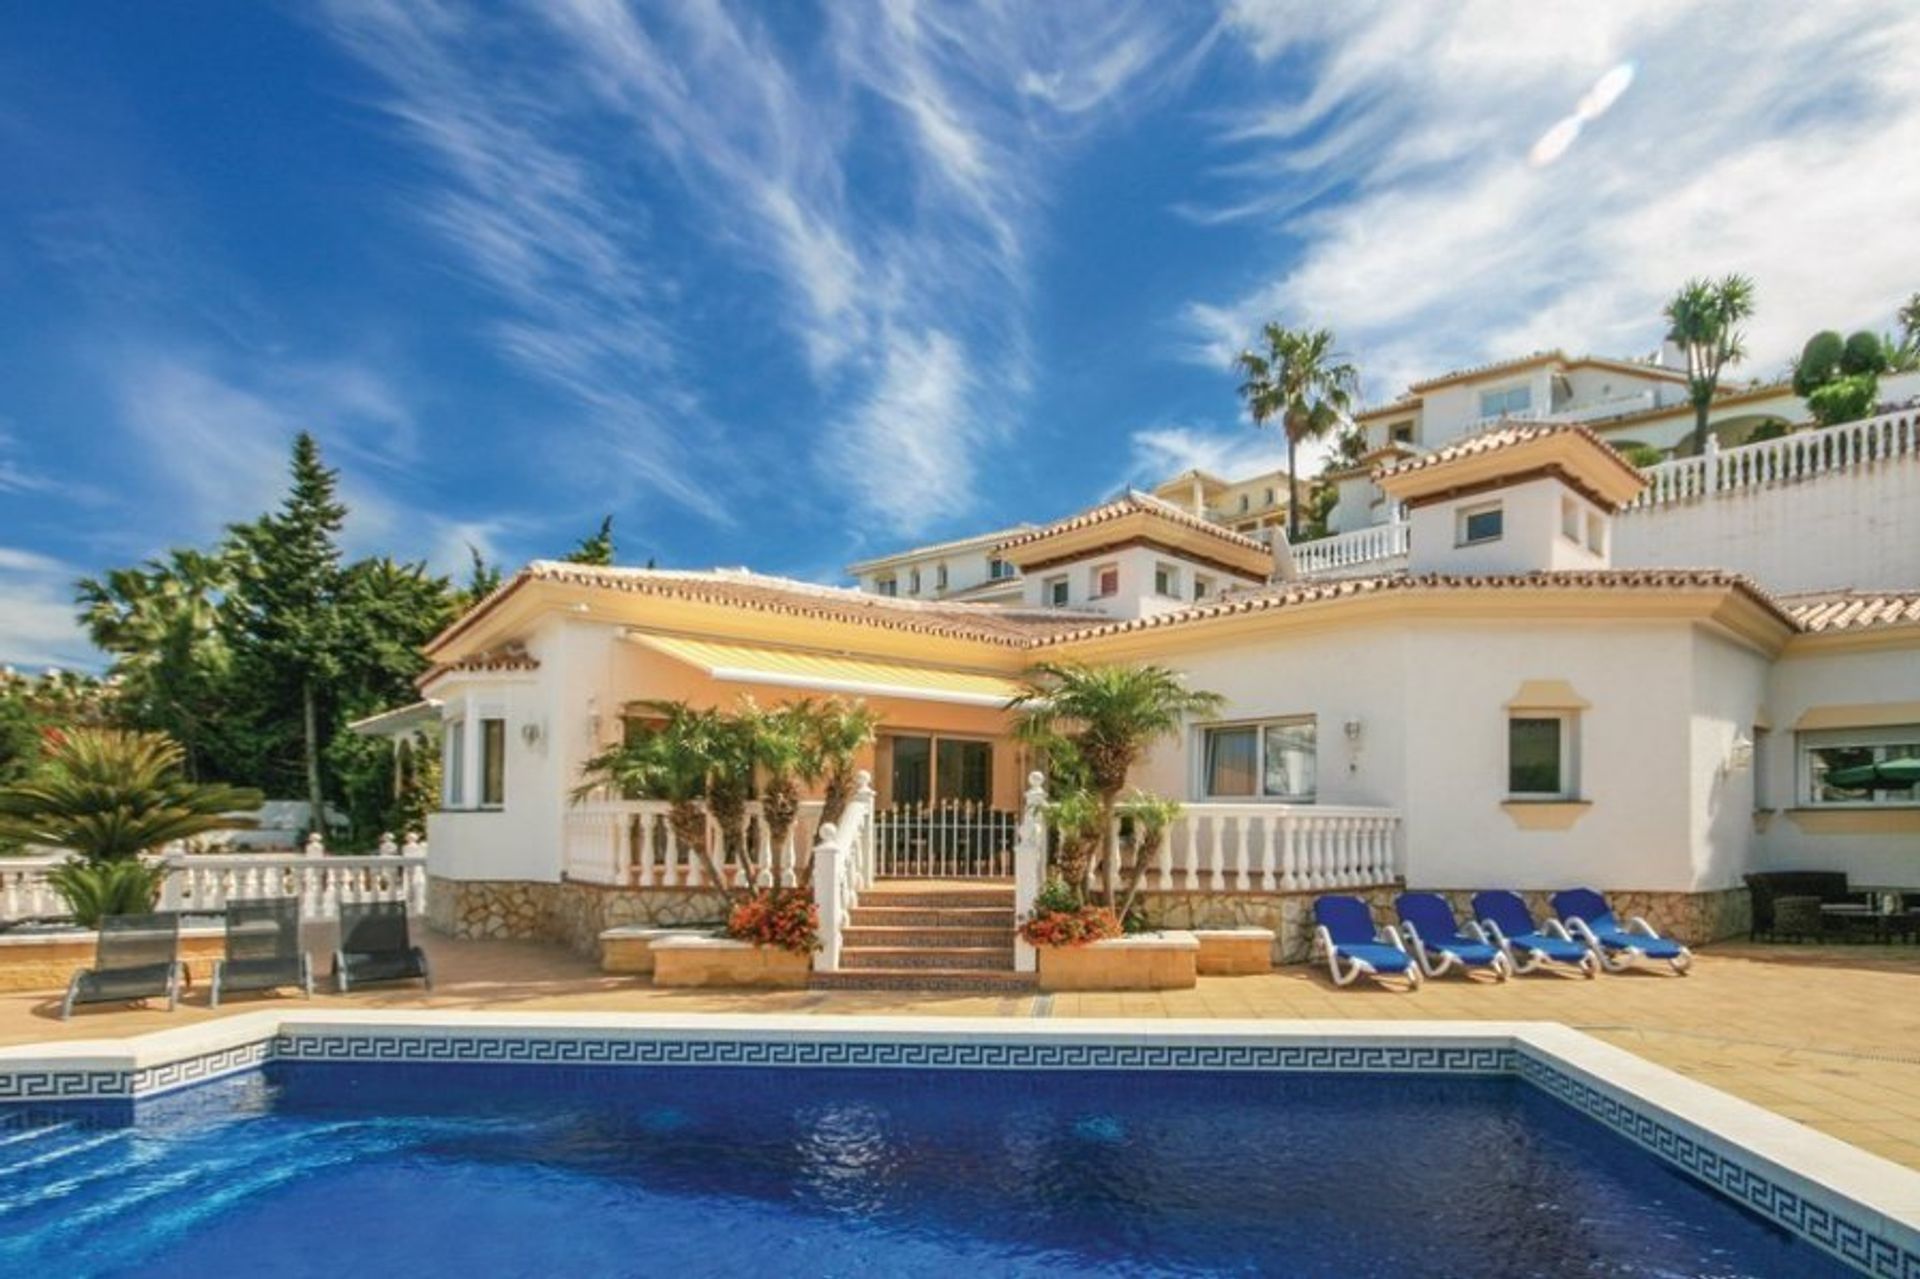 Enjoy your holiday in Riviera del Sol with our luxury villas with private pools